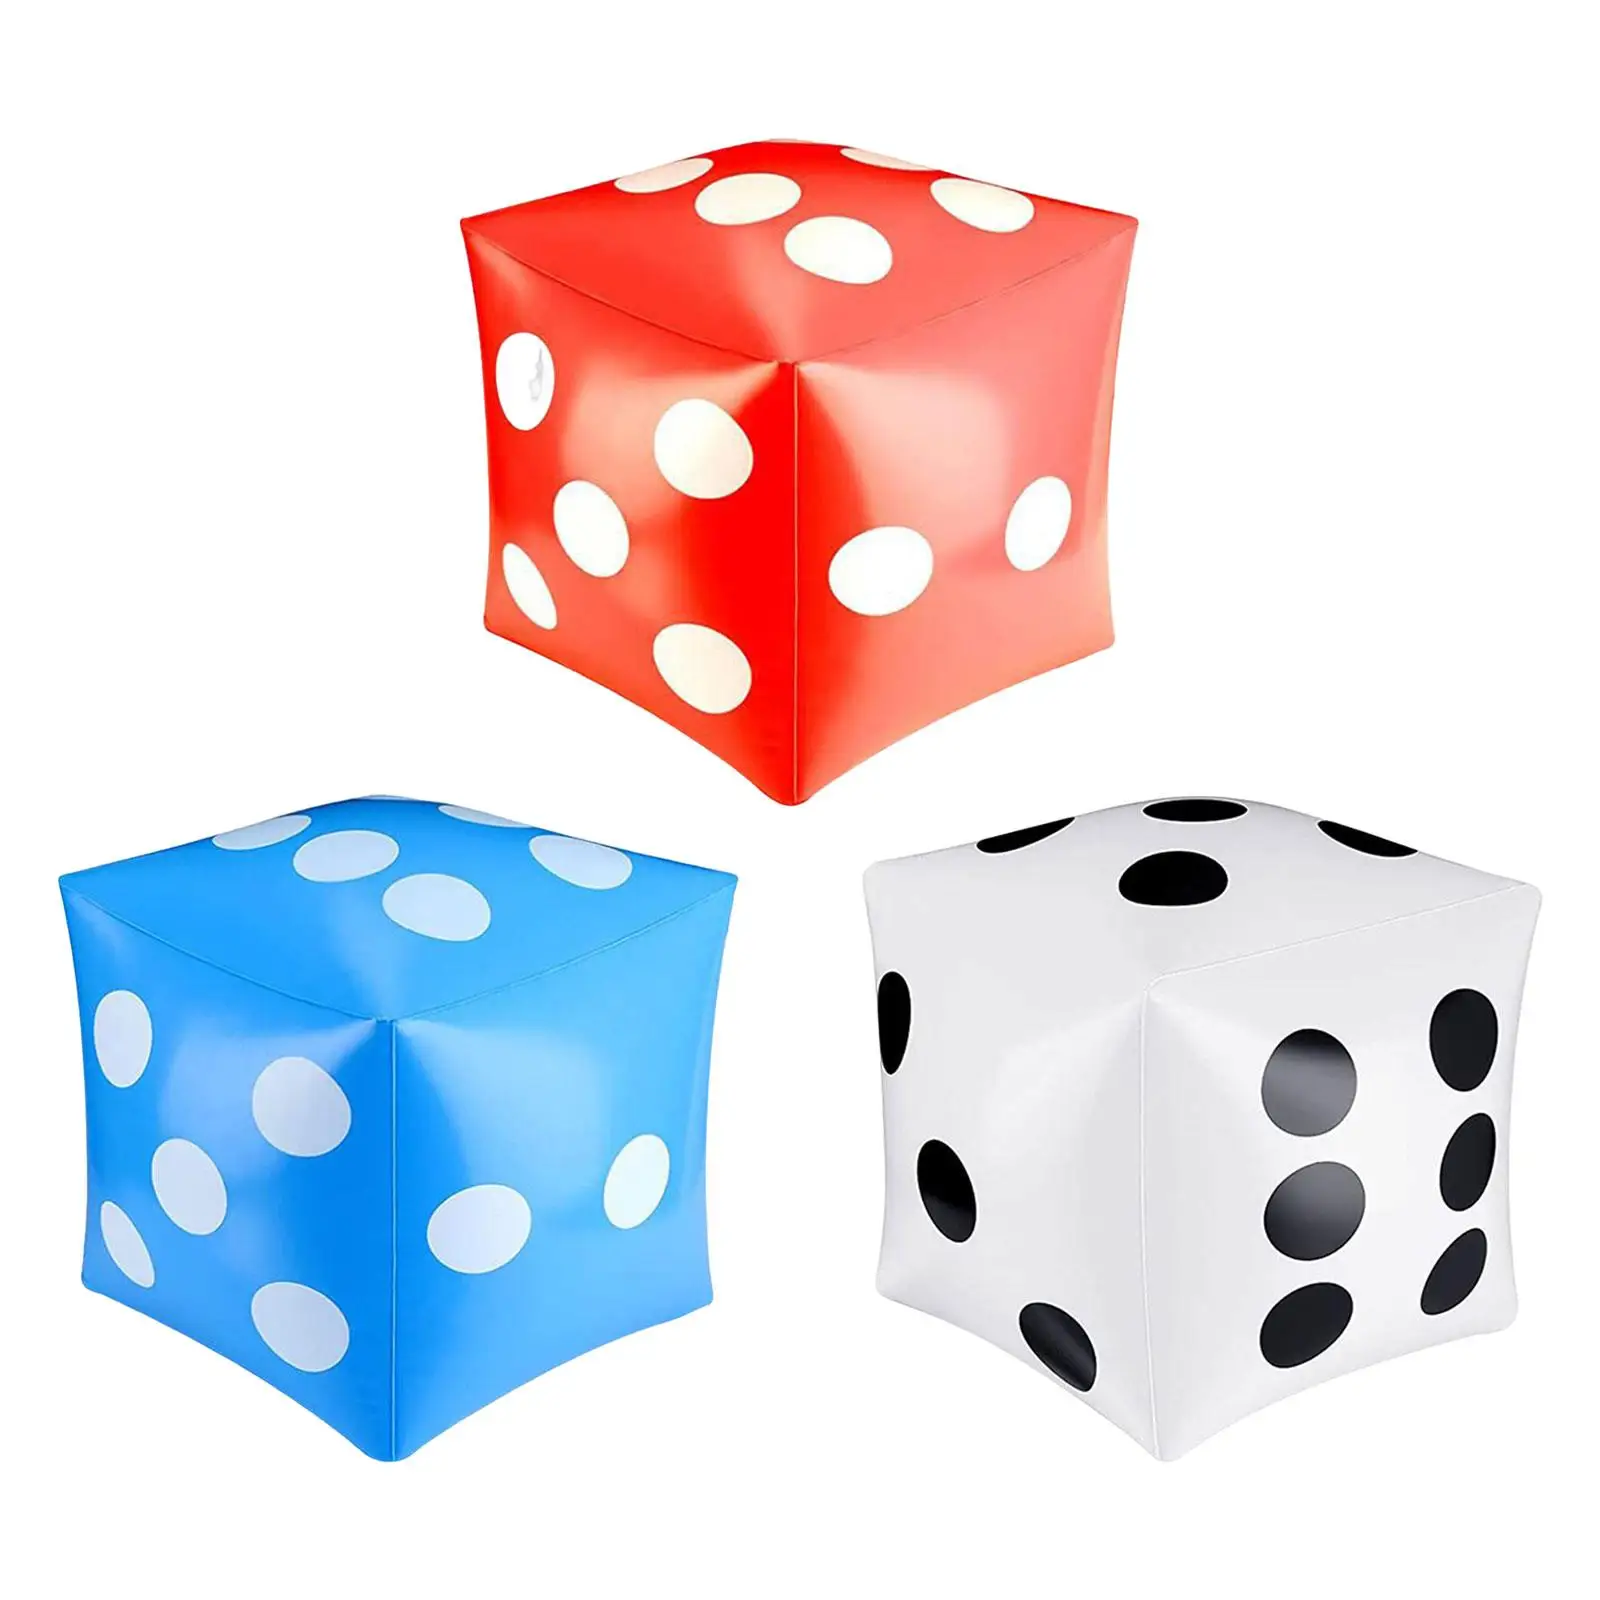 

Giant Inflatable Dice Novelty Swimming Pool Dices for Pools Garden Backyard